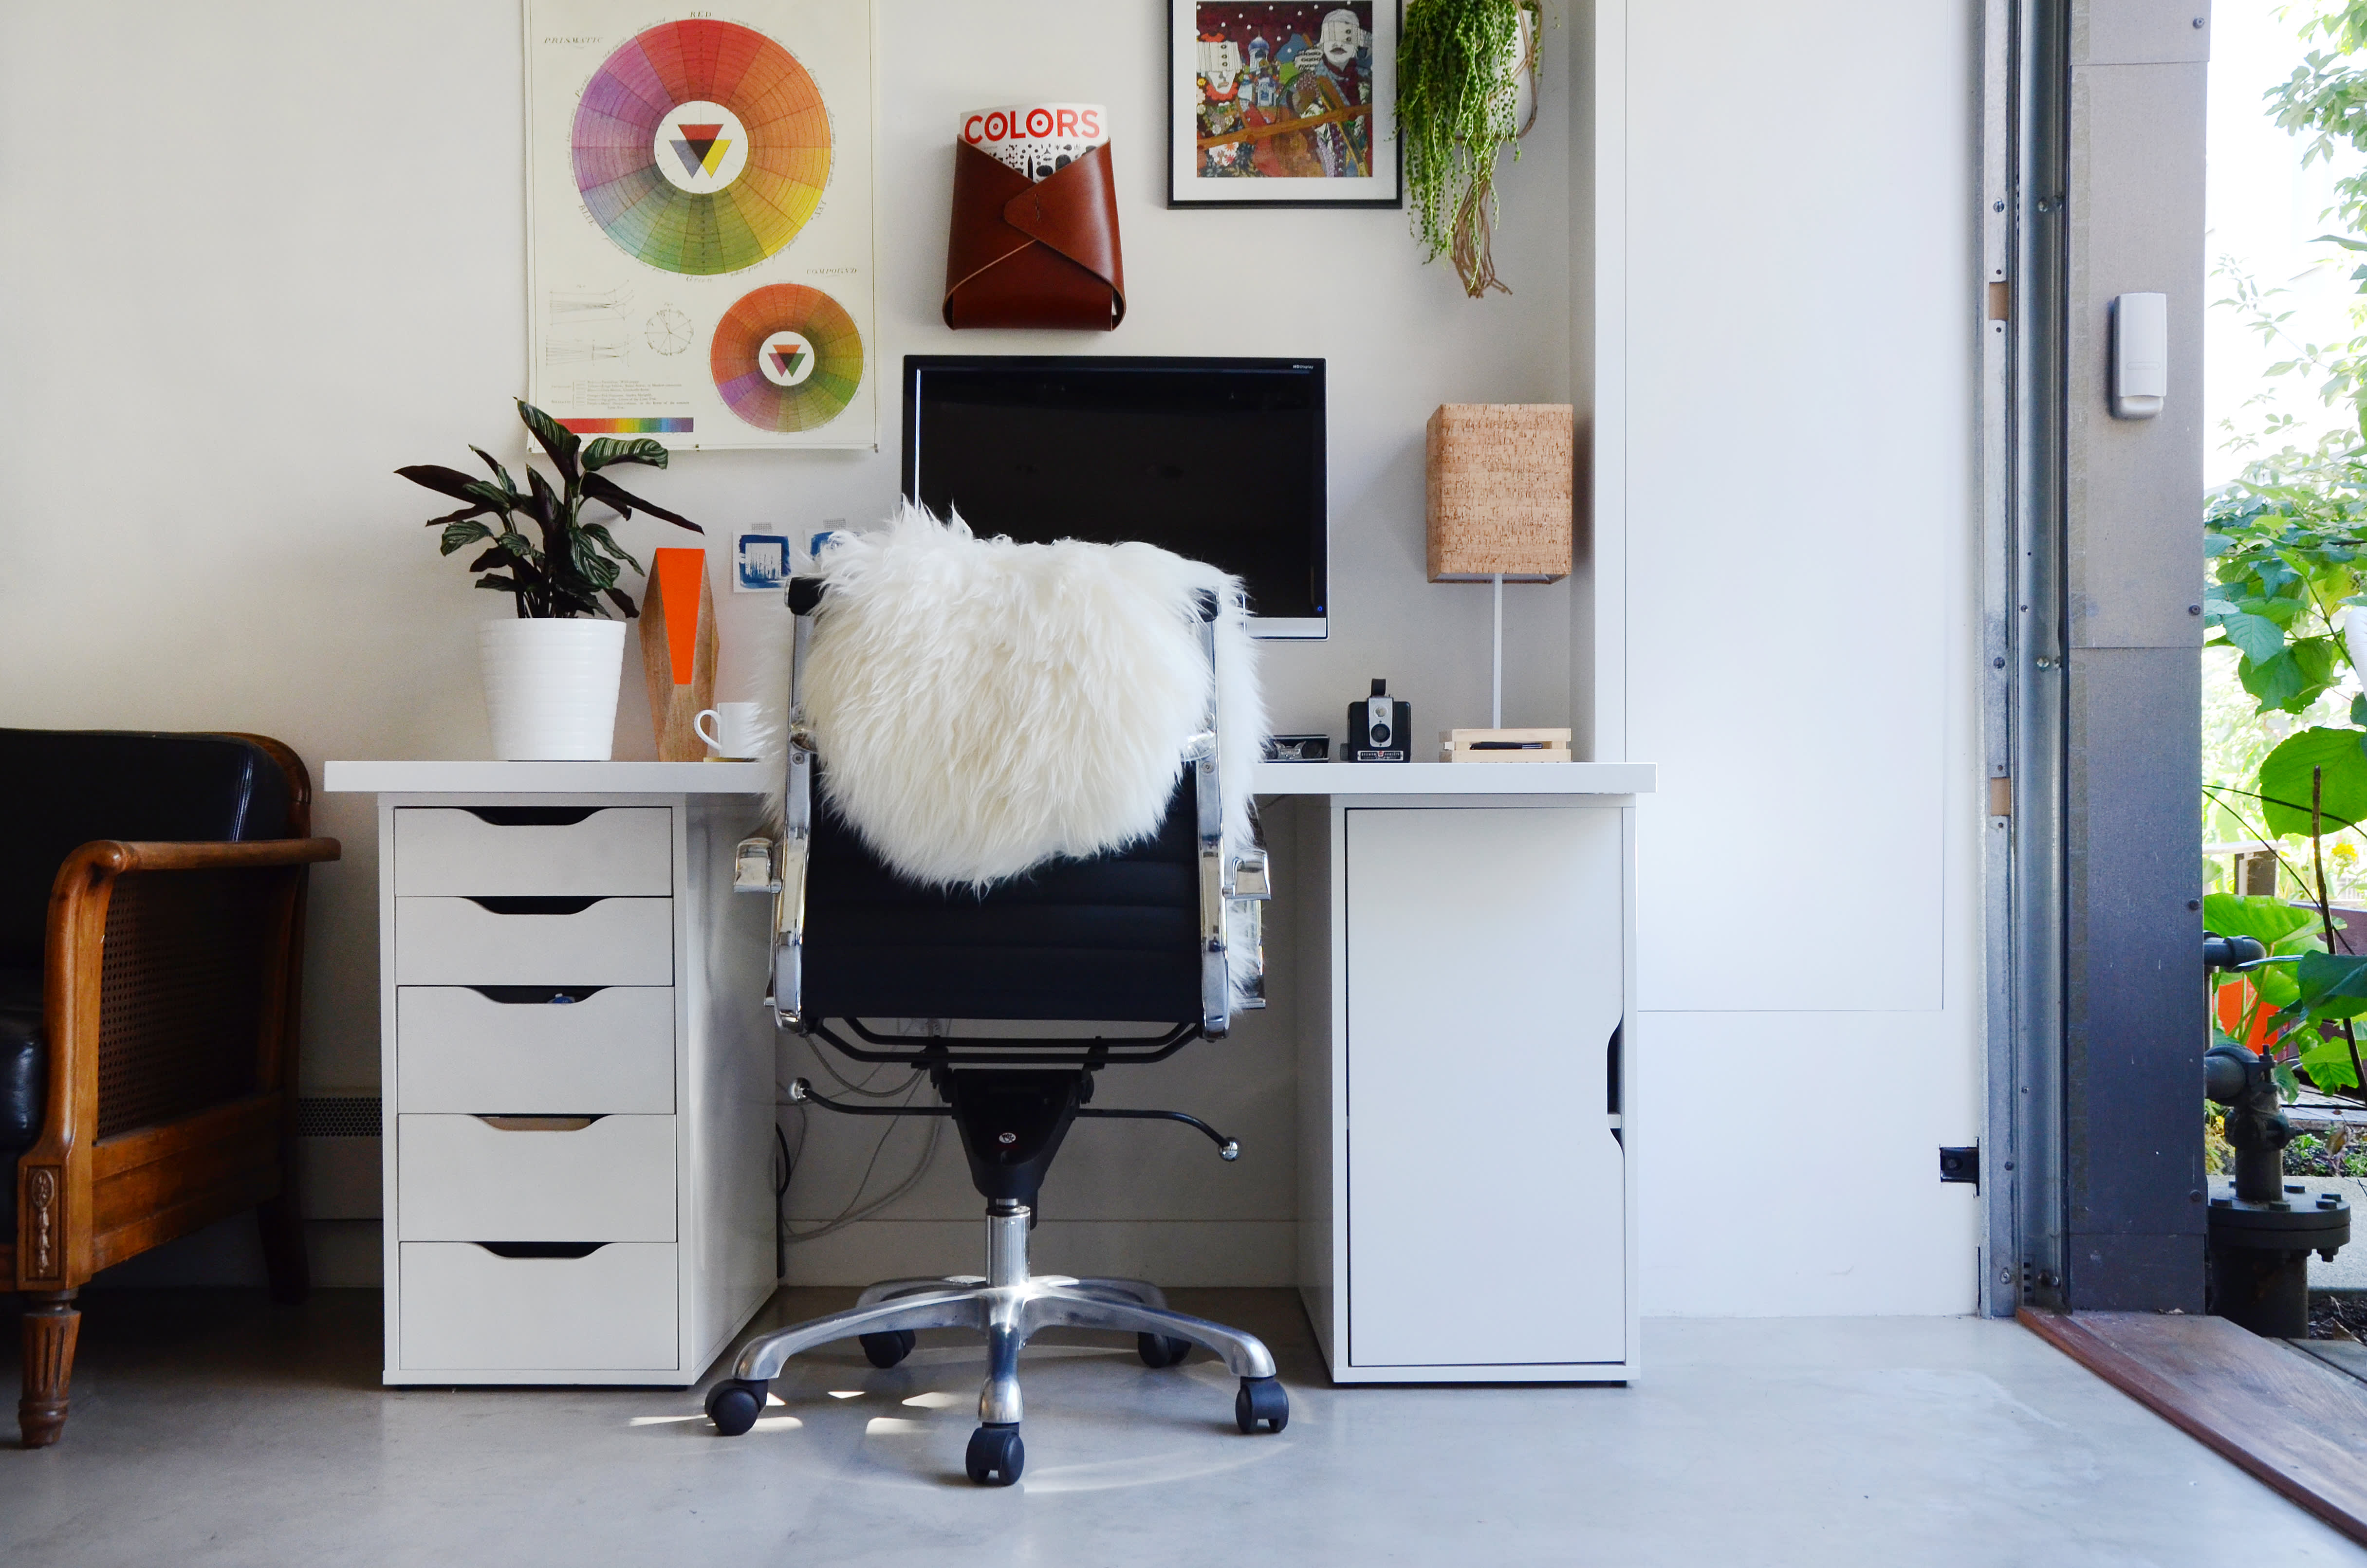 How To Choose a Desk for Your Home Office